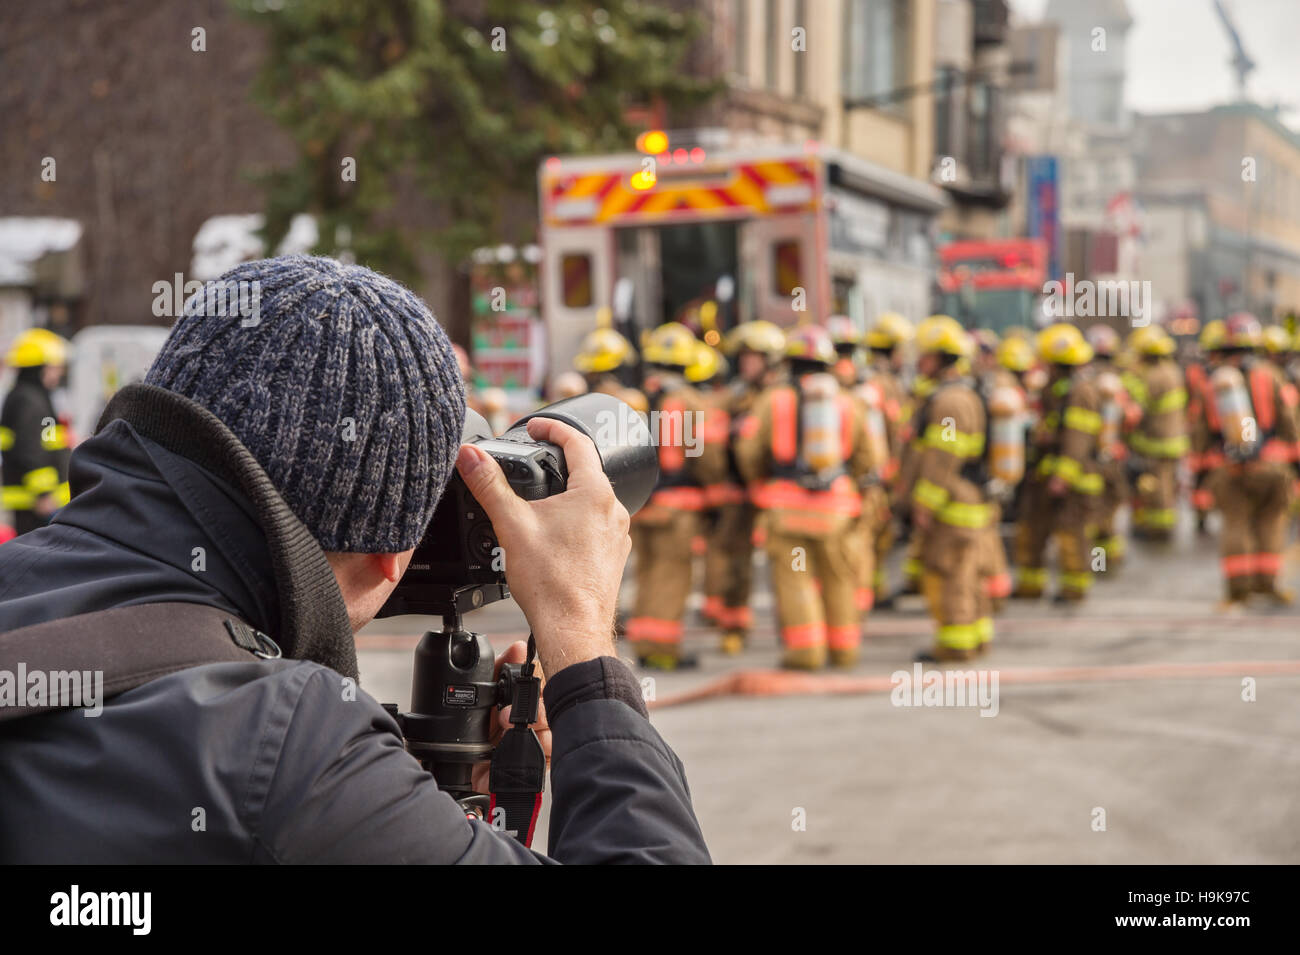 Montreal, CA - 23 Nov 2016: Photographer taking pictures of Montreal Firefighters working on 'Cafe Amusement 68' building on fire, 3464 Park Avenue. Stock Photo